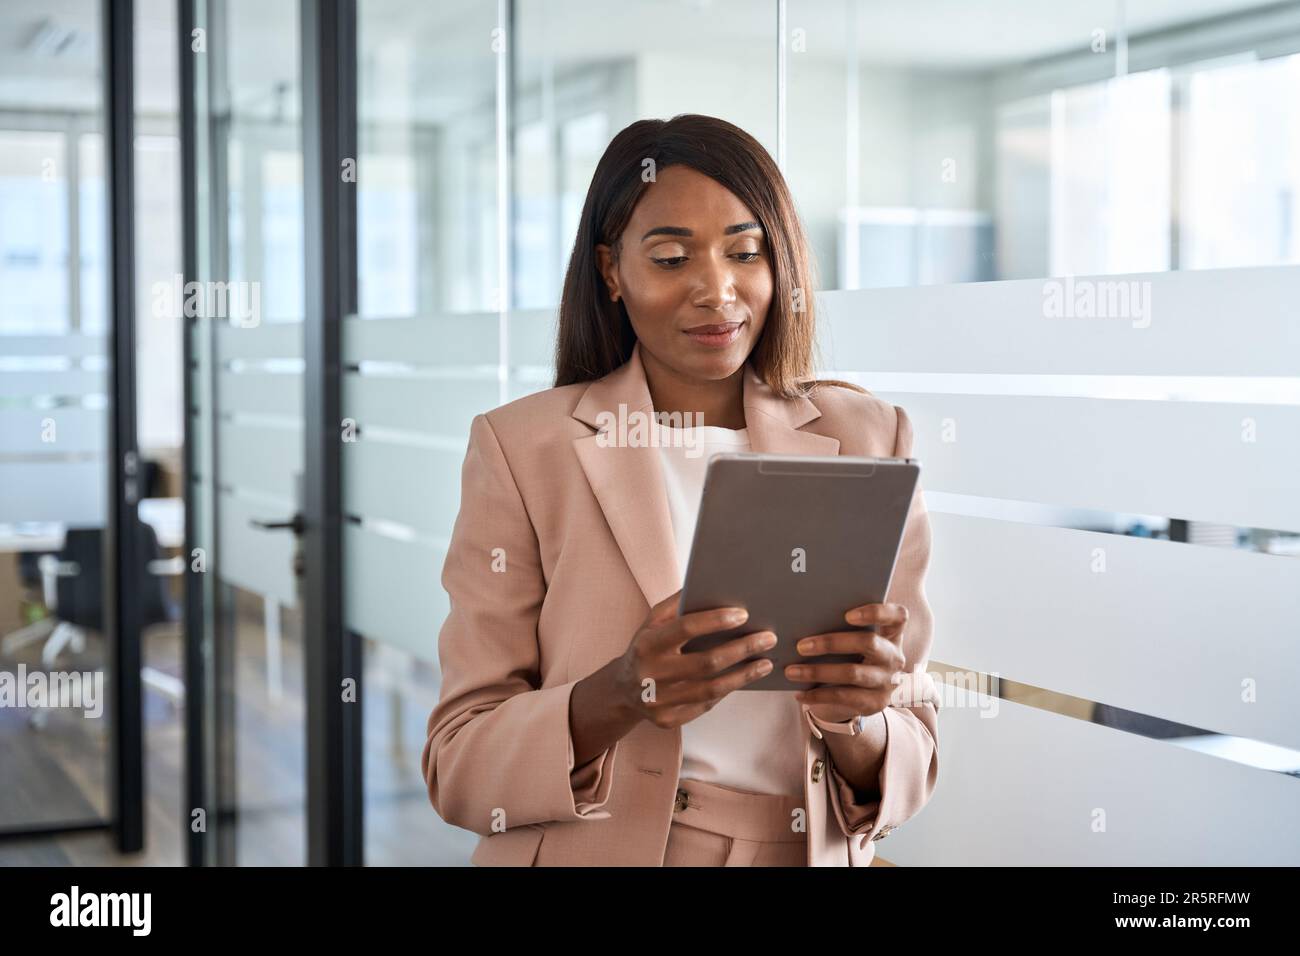 Young busy African American business woman using tablet standing in office. Stock Photo